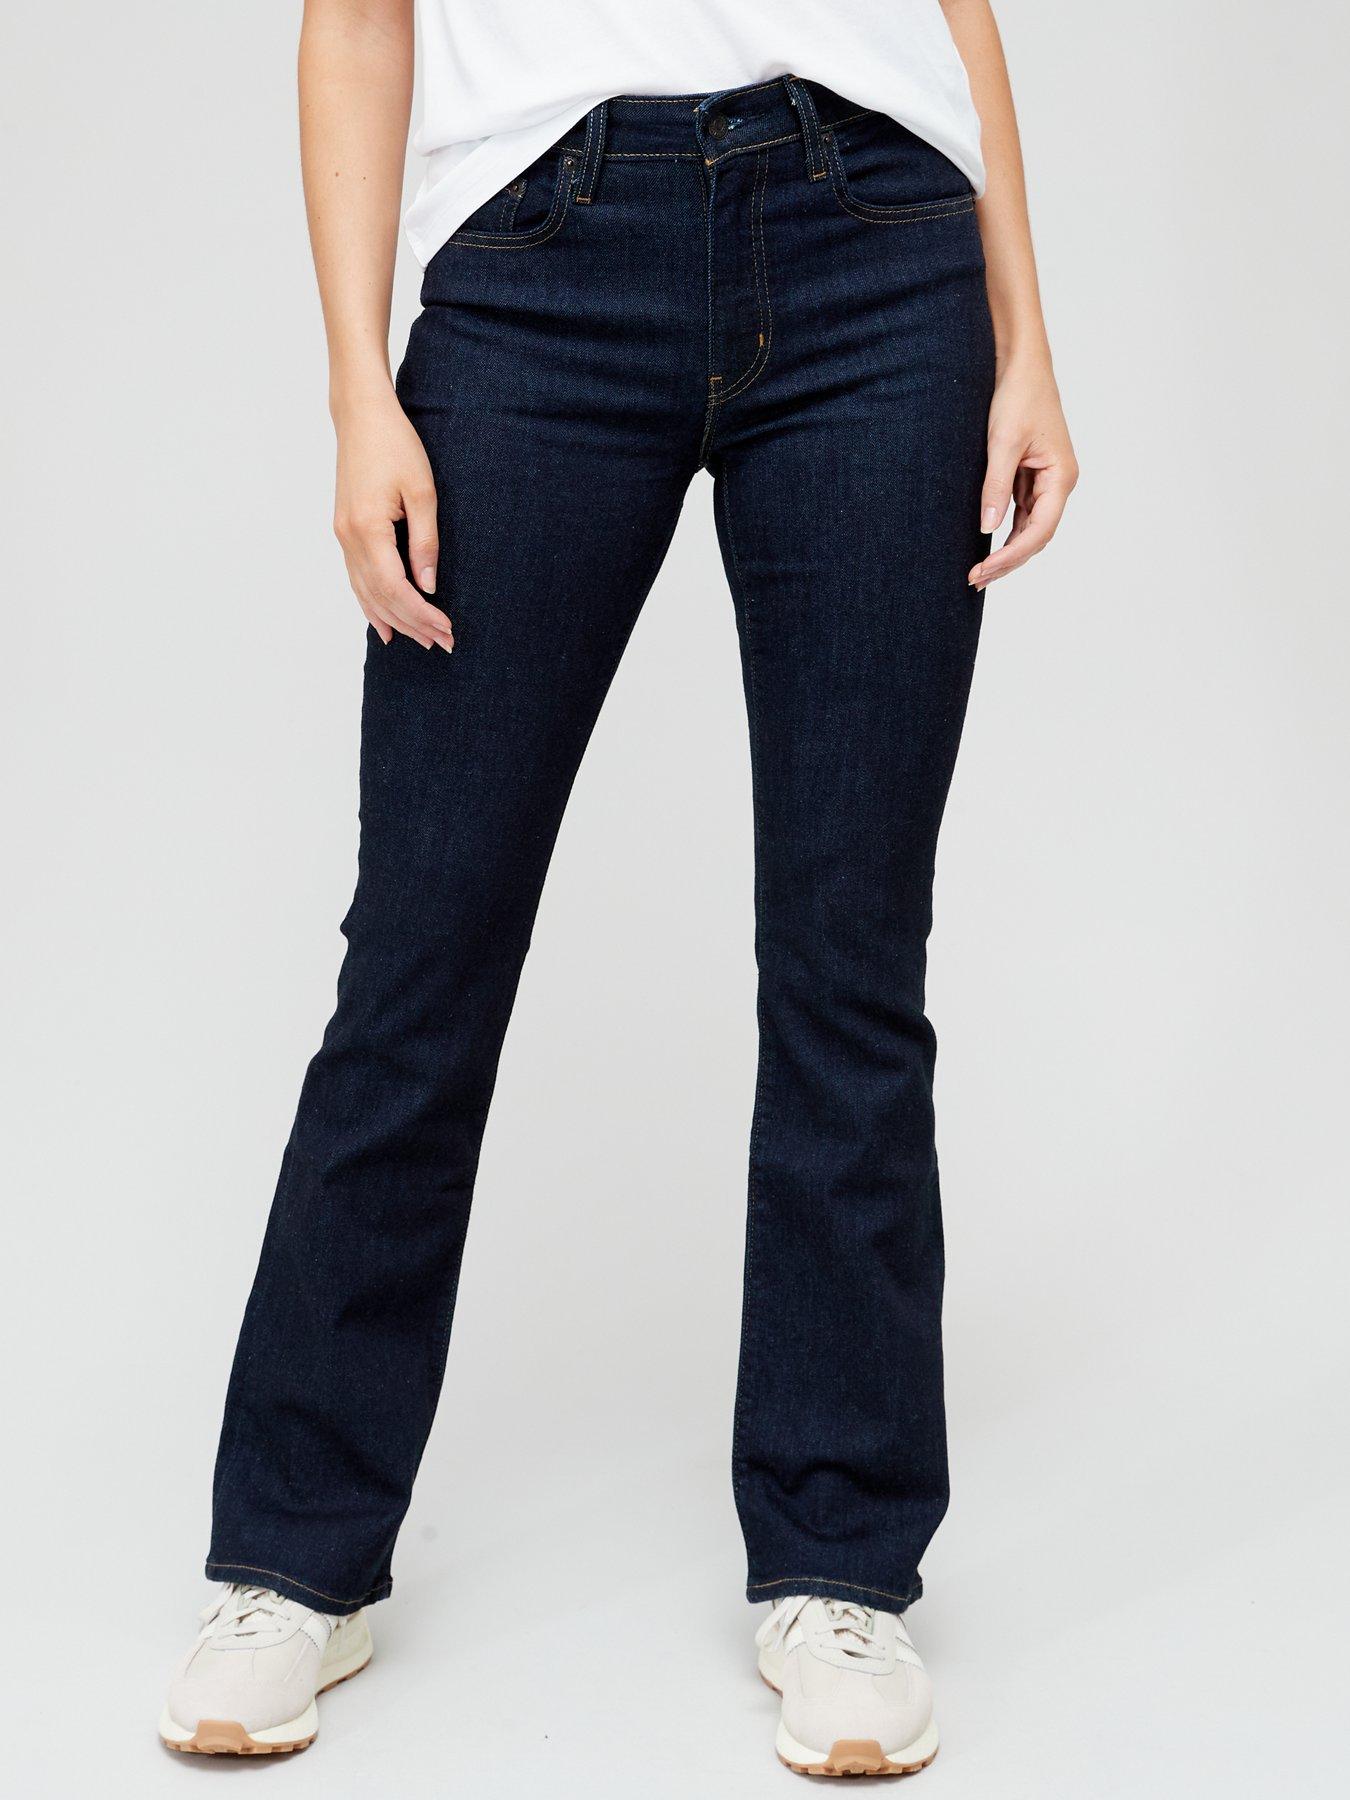 Levi's 725™ High Rise Bootcut Jean - Blue Wave Rinse